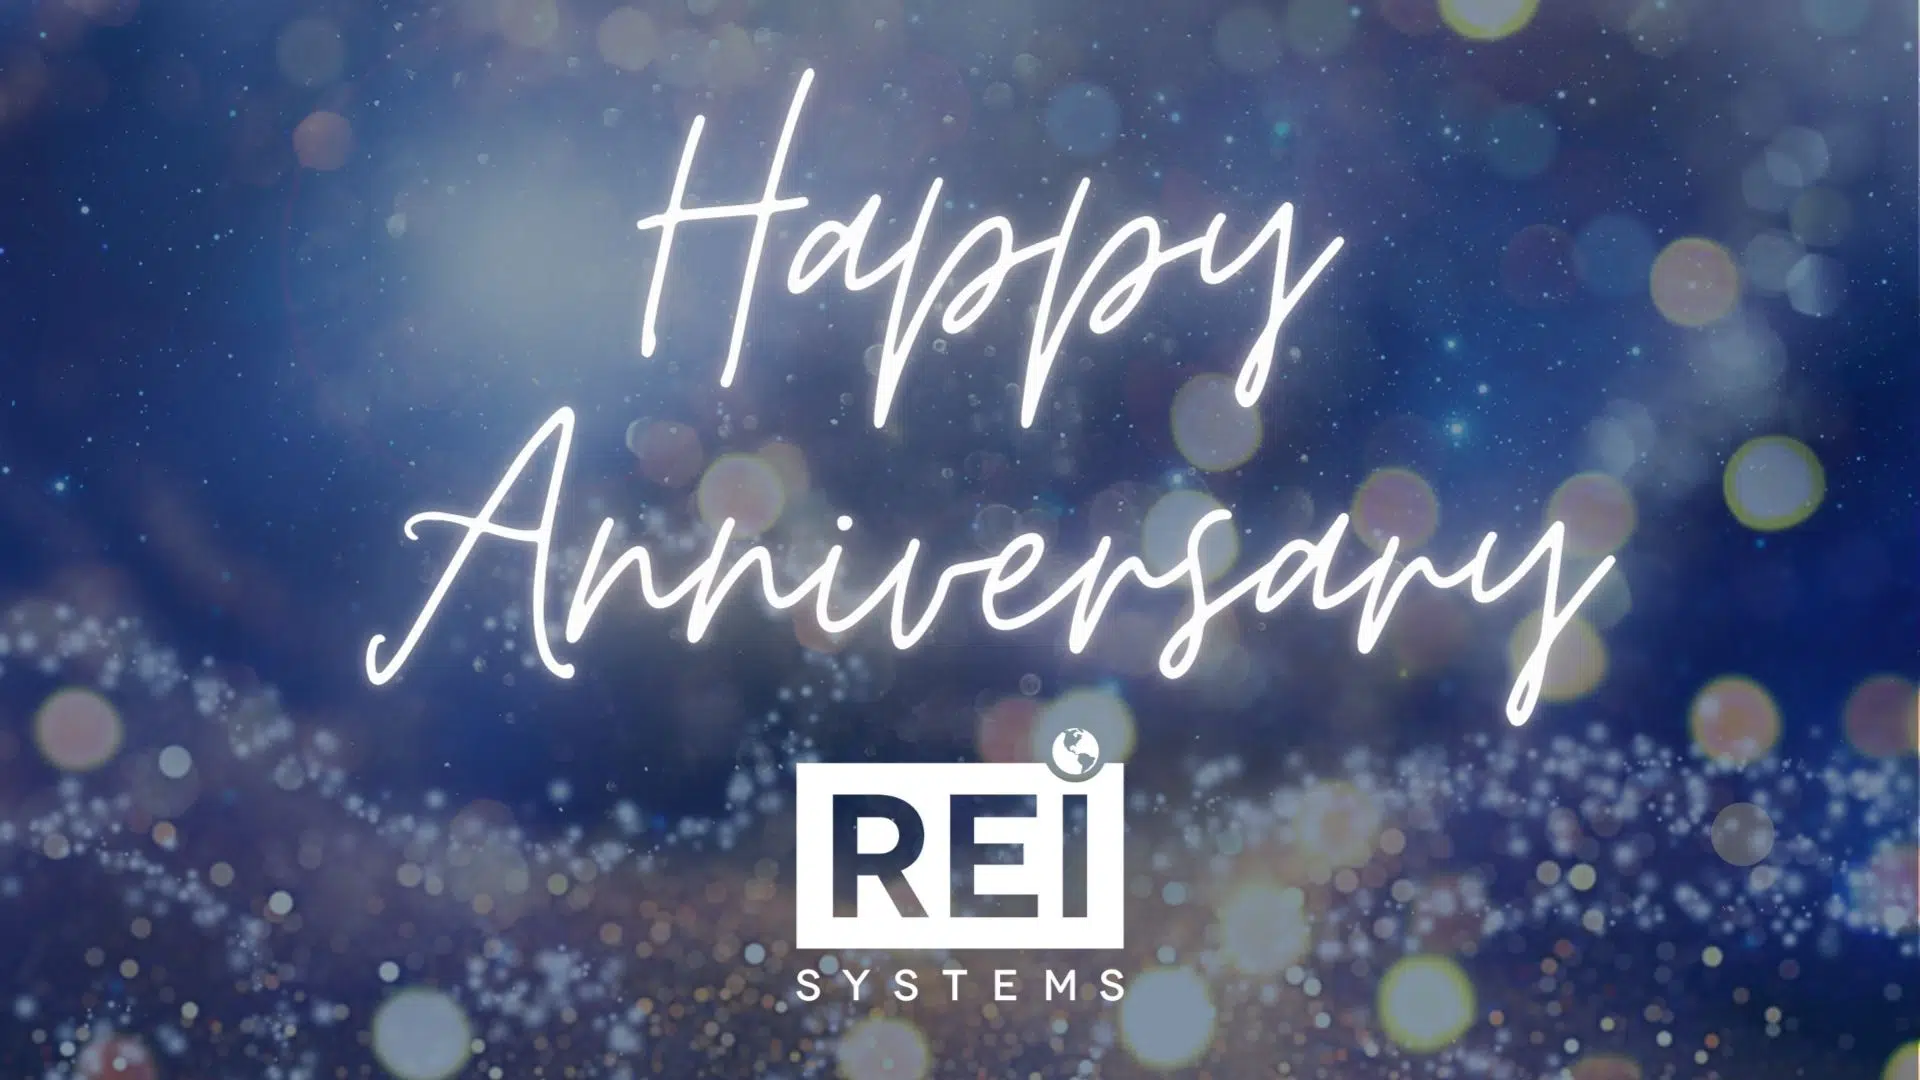 Happy 30th Anniversary, REI Systems!